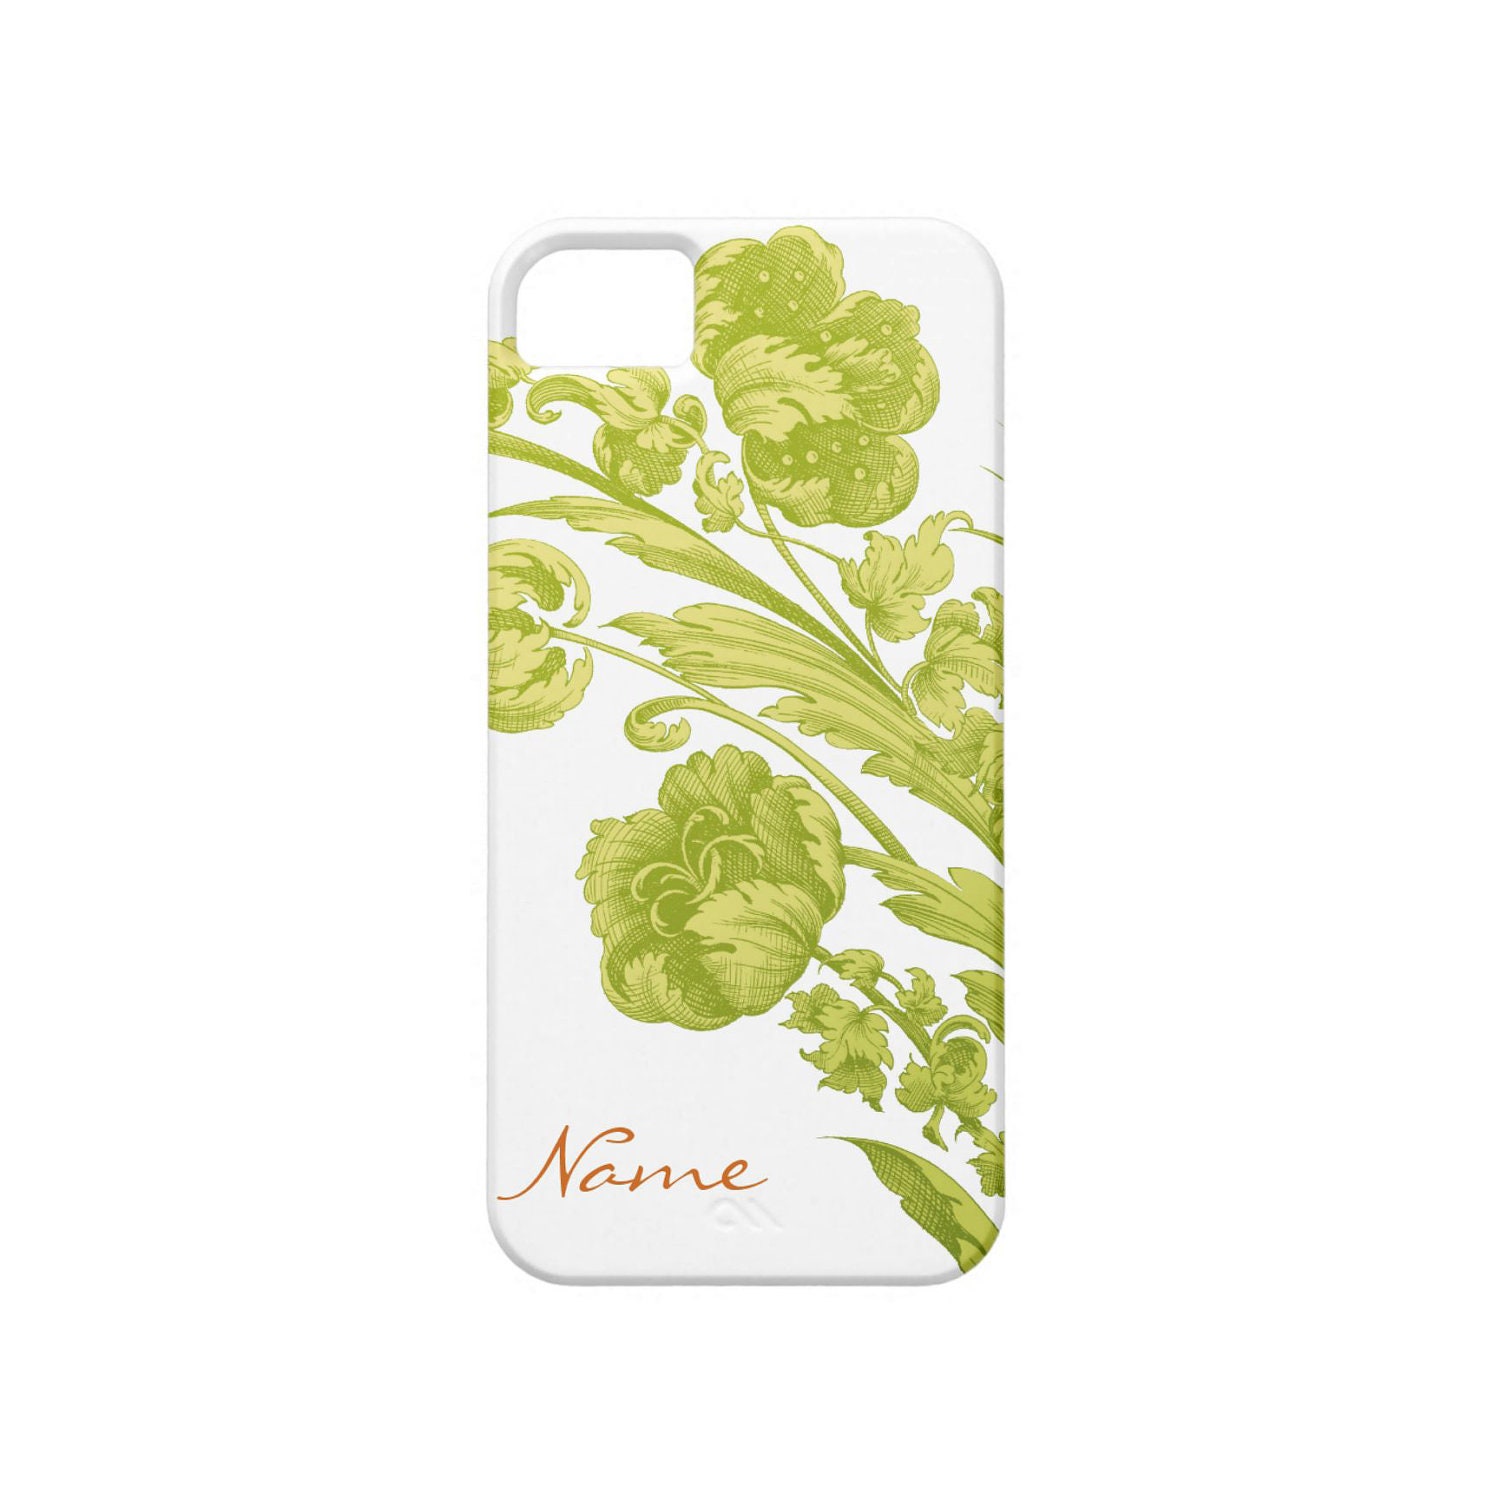 Personalized iPhone 5 Case, Flowers in Green and Orange, Customized Cell Phone Case